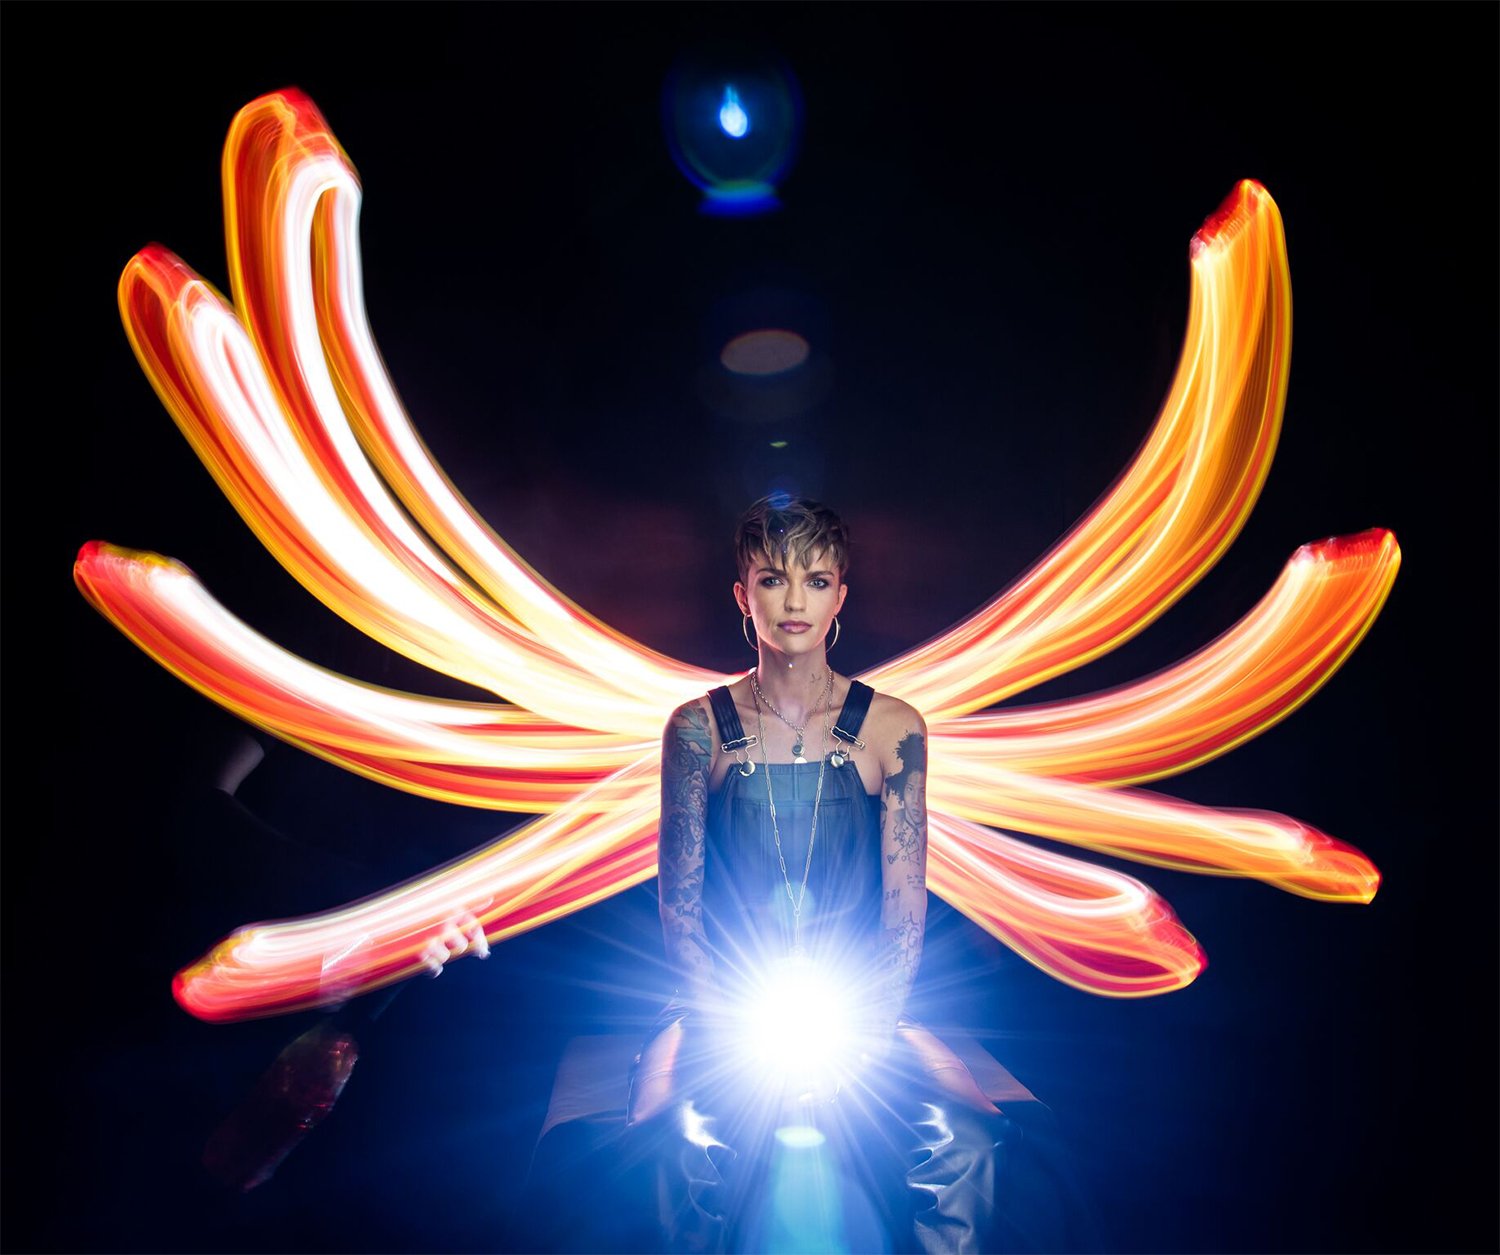 These Light Painting Portraits from Jason D Page Are for iHeartRadio